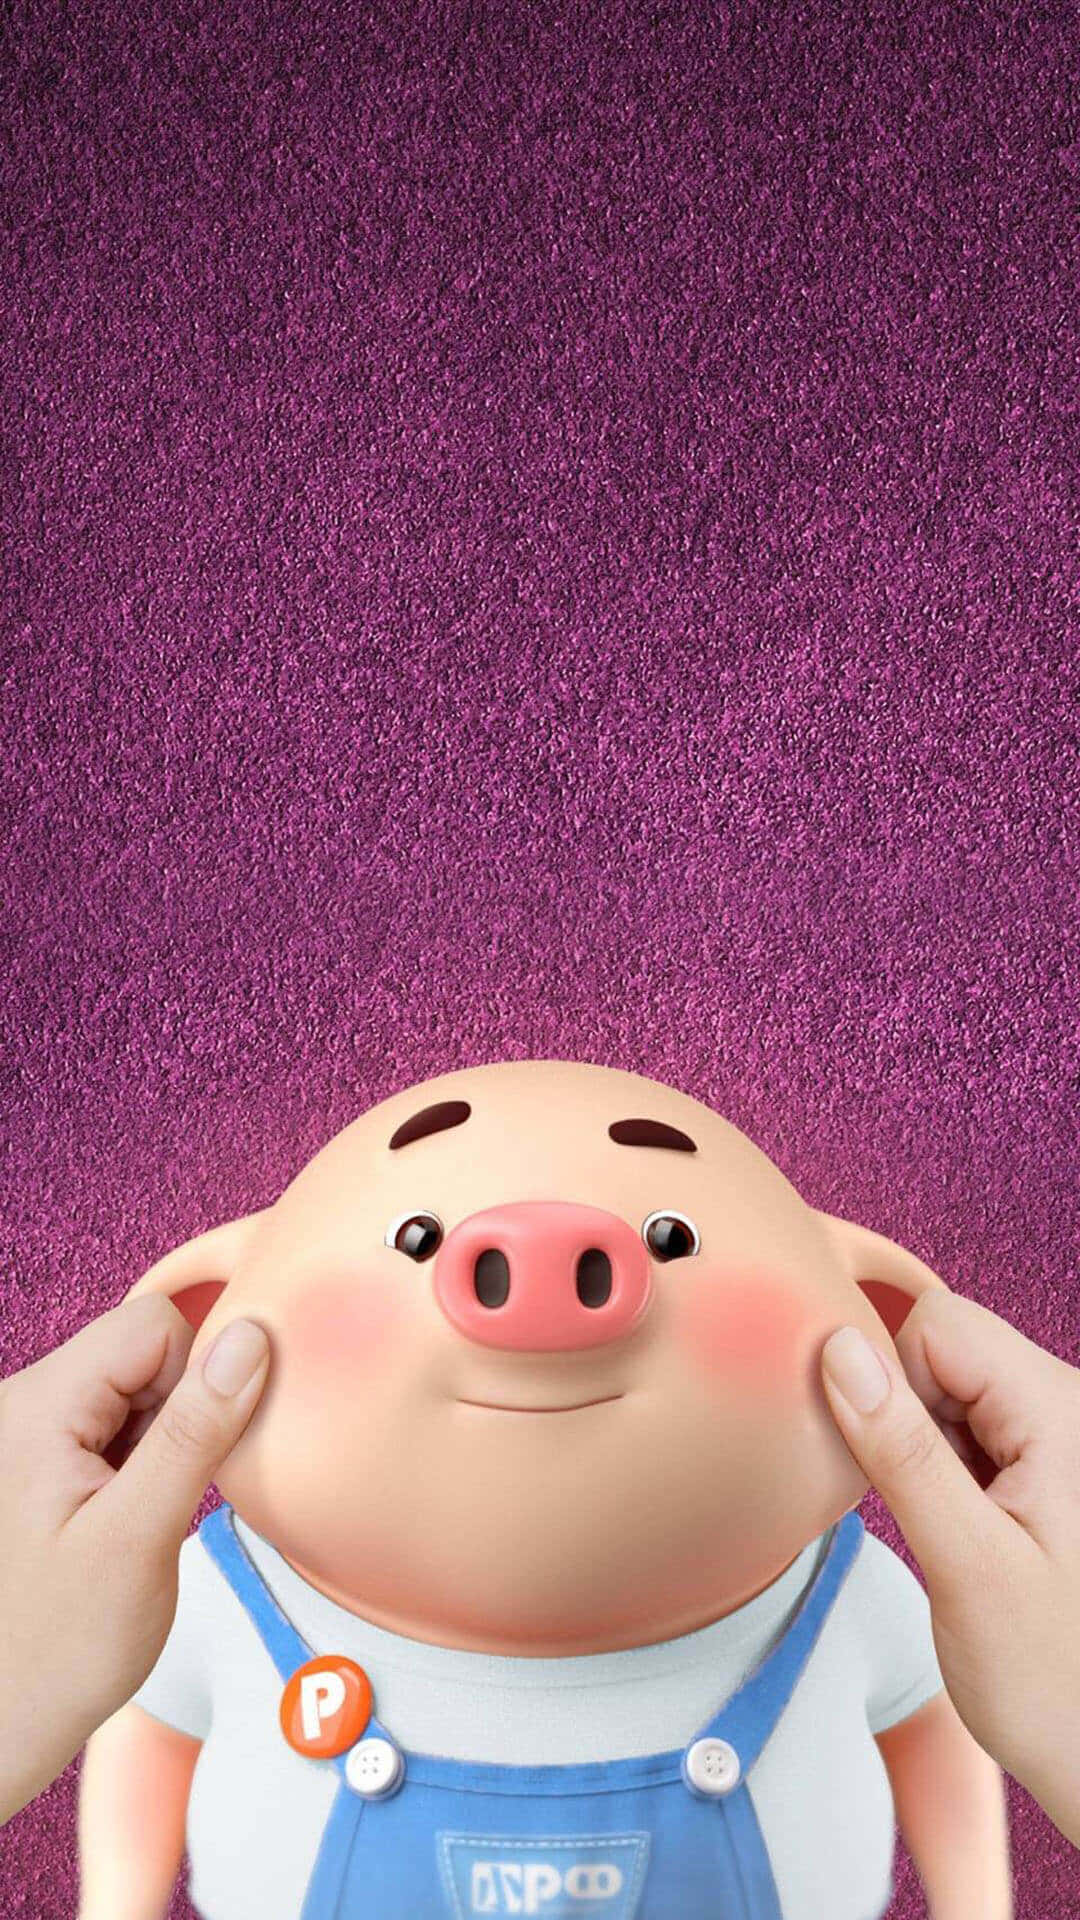 Investing Wisely - Save Money with Piggy!